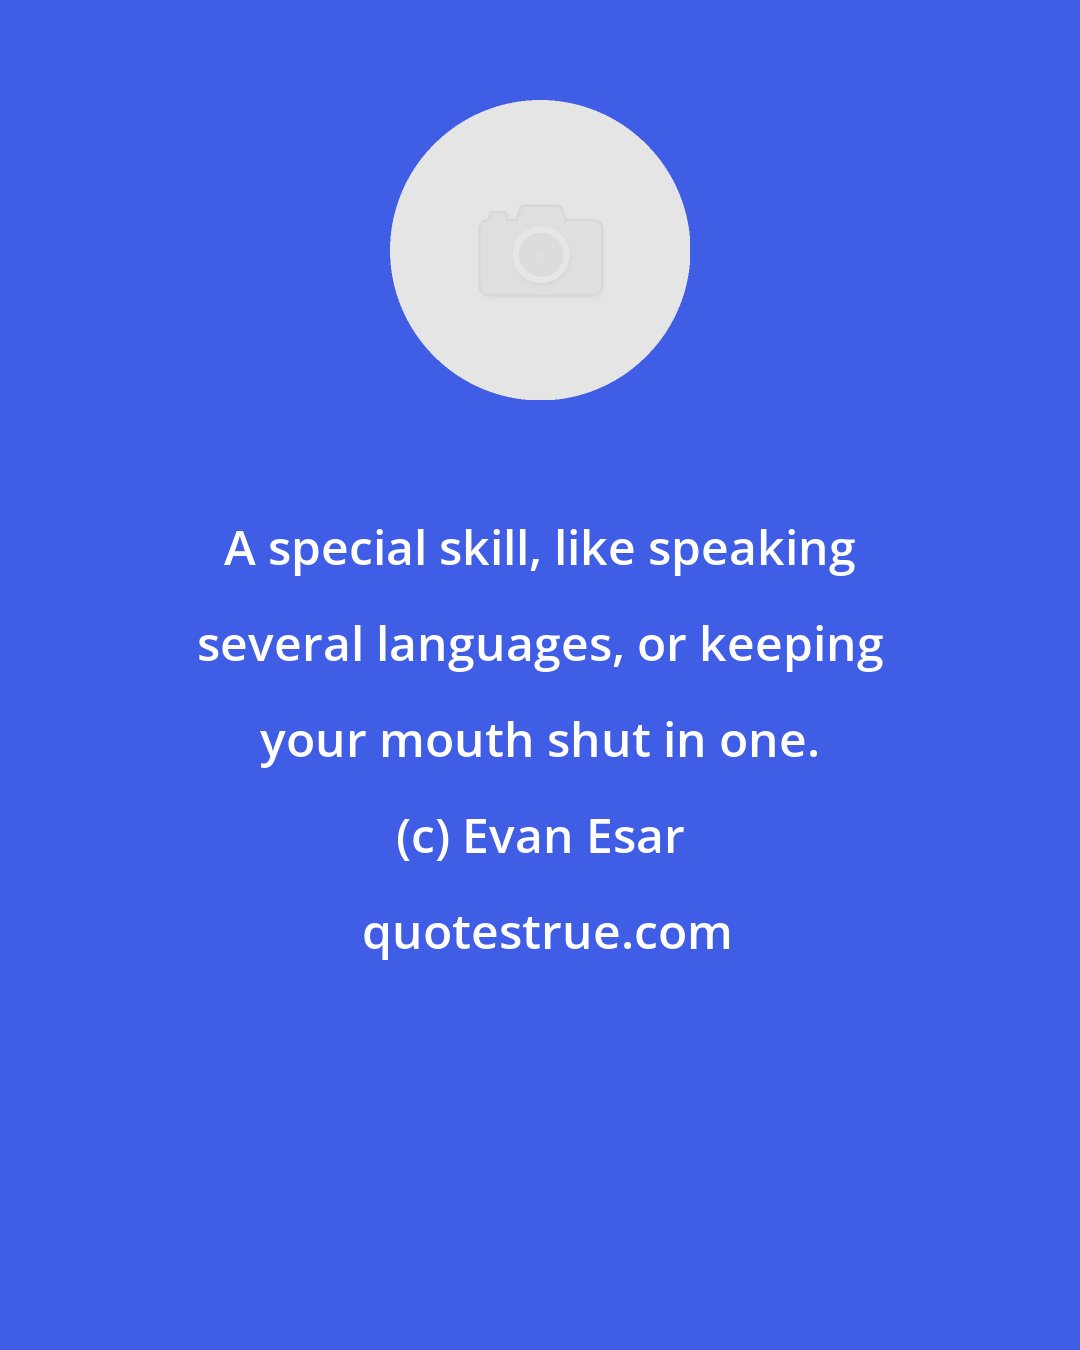 Evan Esar: A special skill, like speaking several languages, or keeping your mouth shut in one.